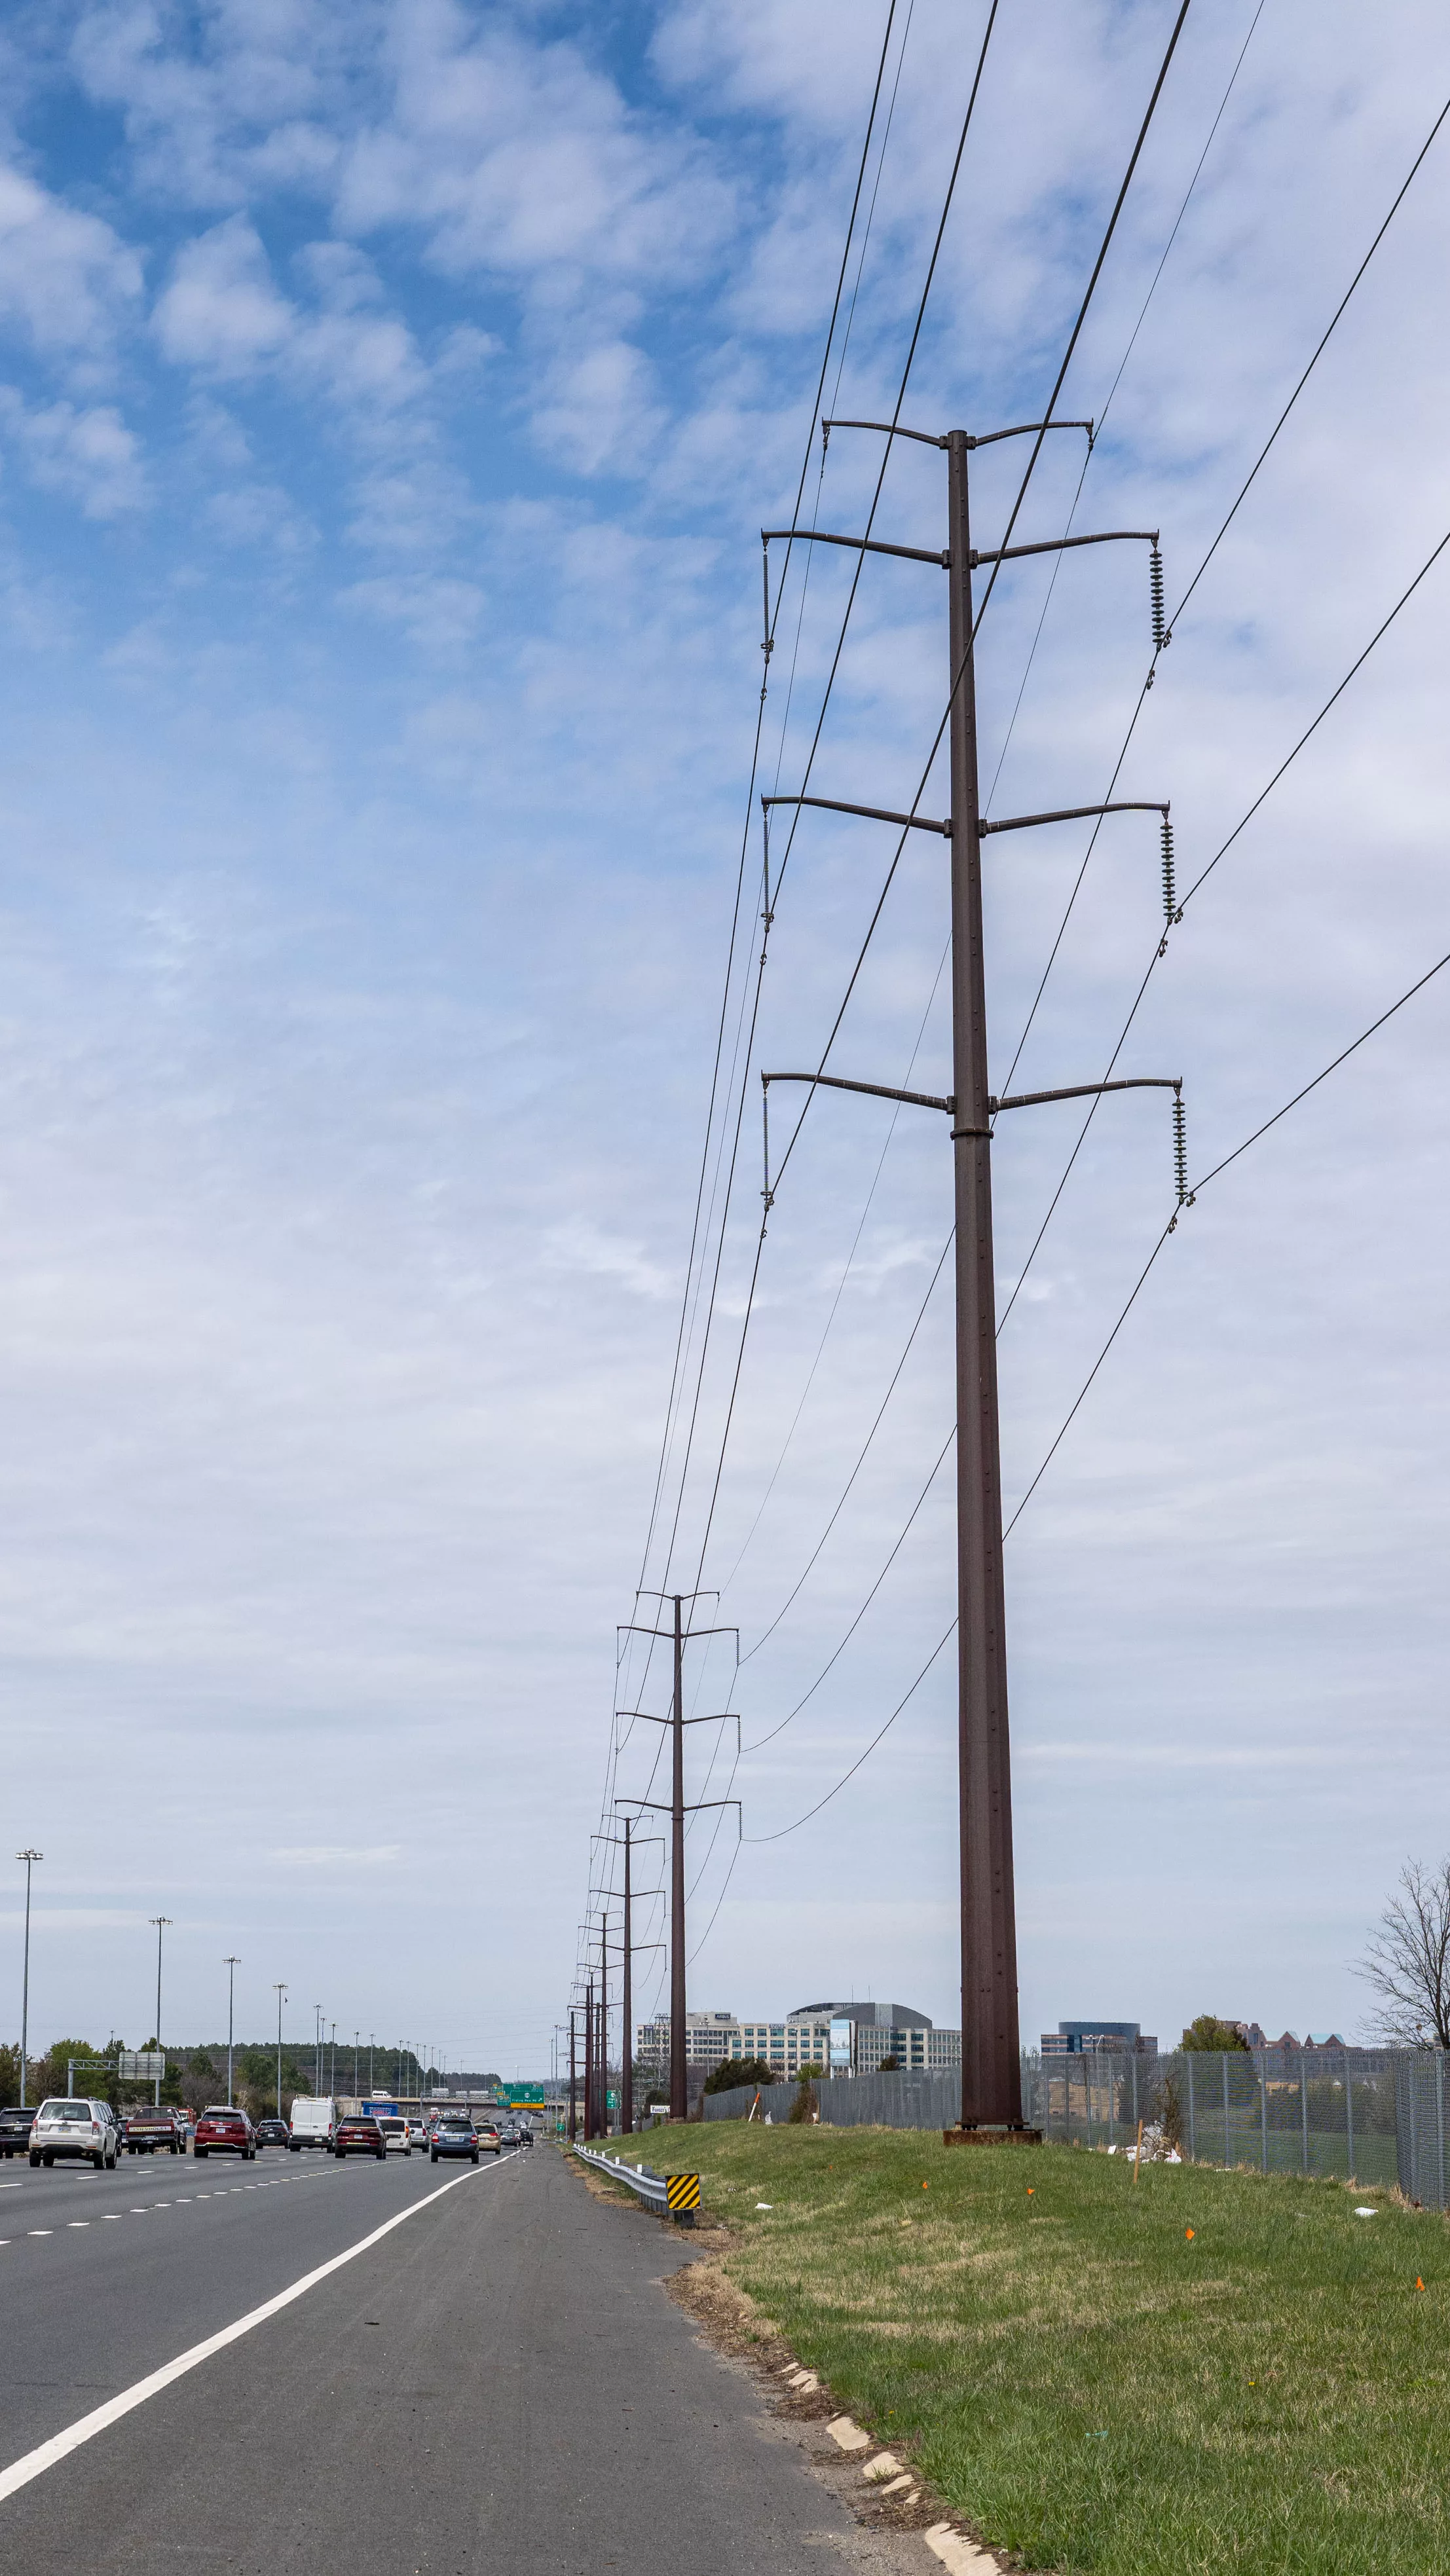 towering transmission lines along a major road